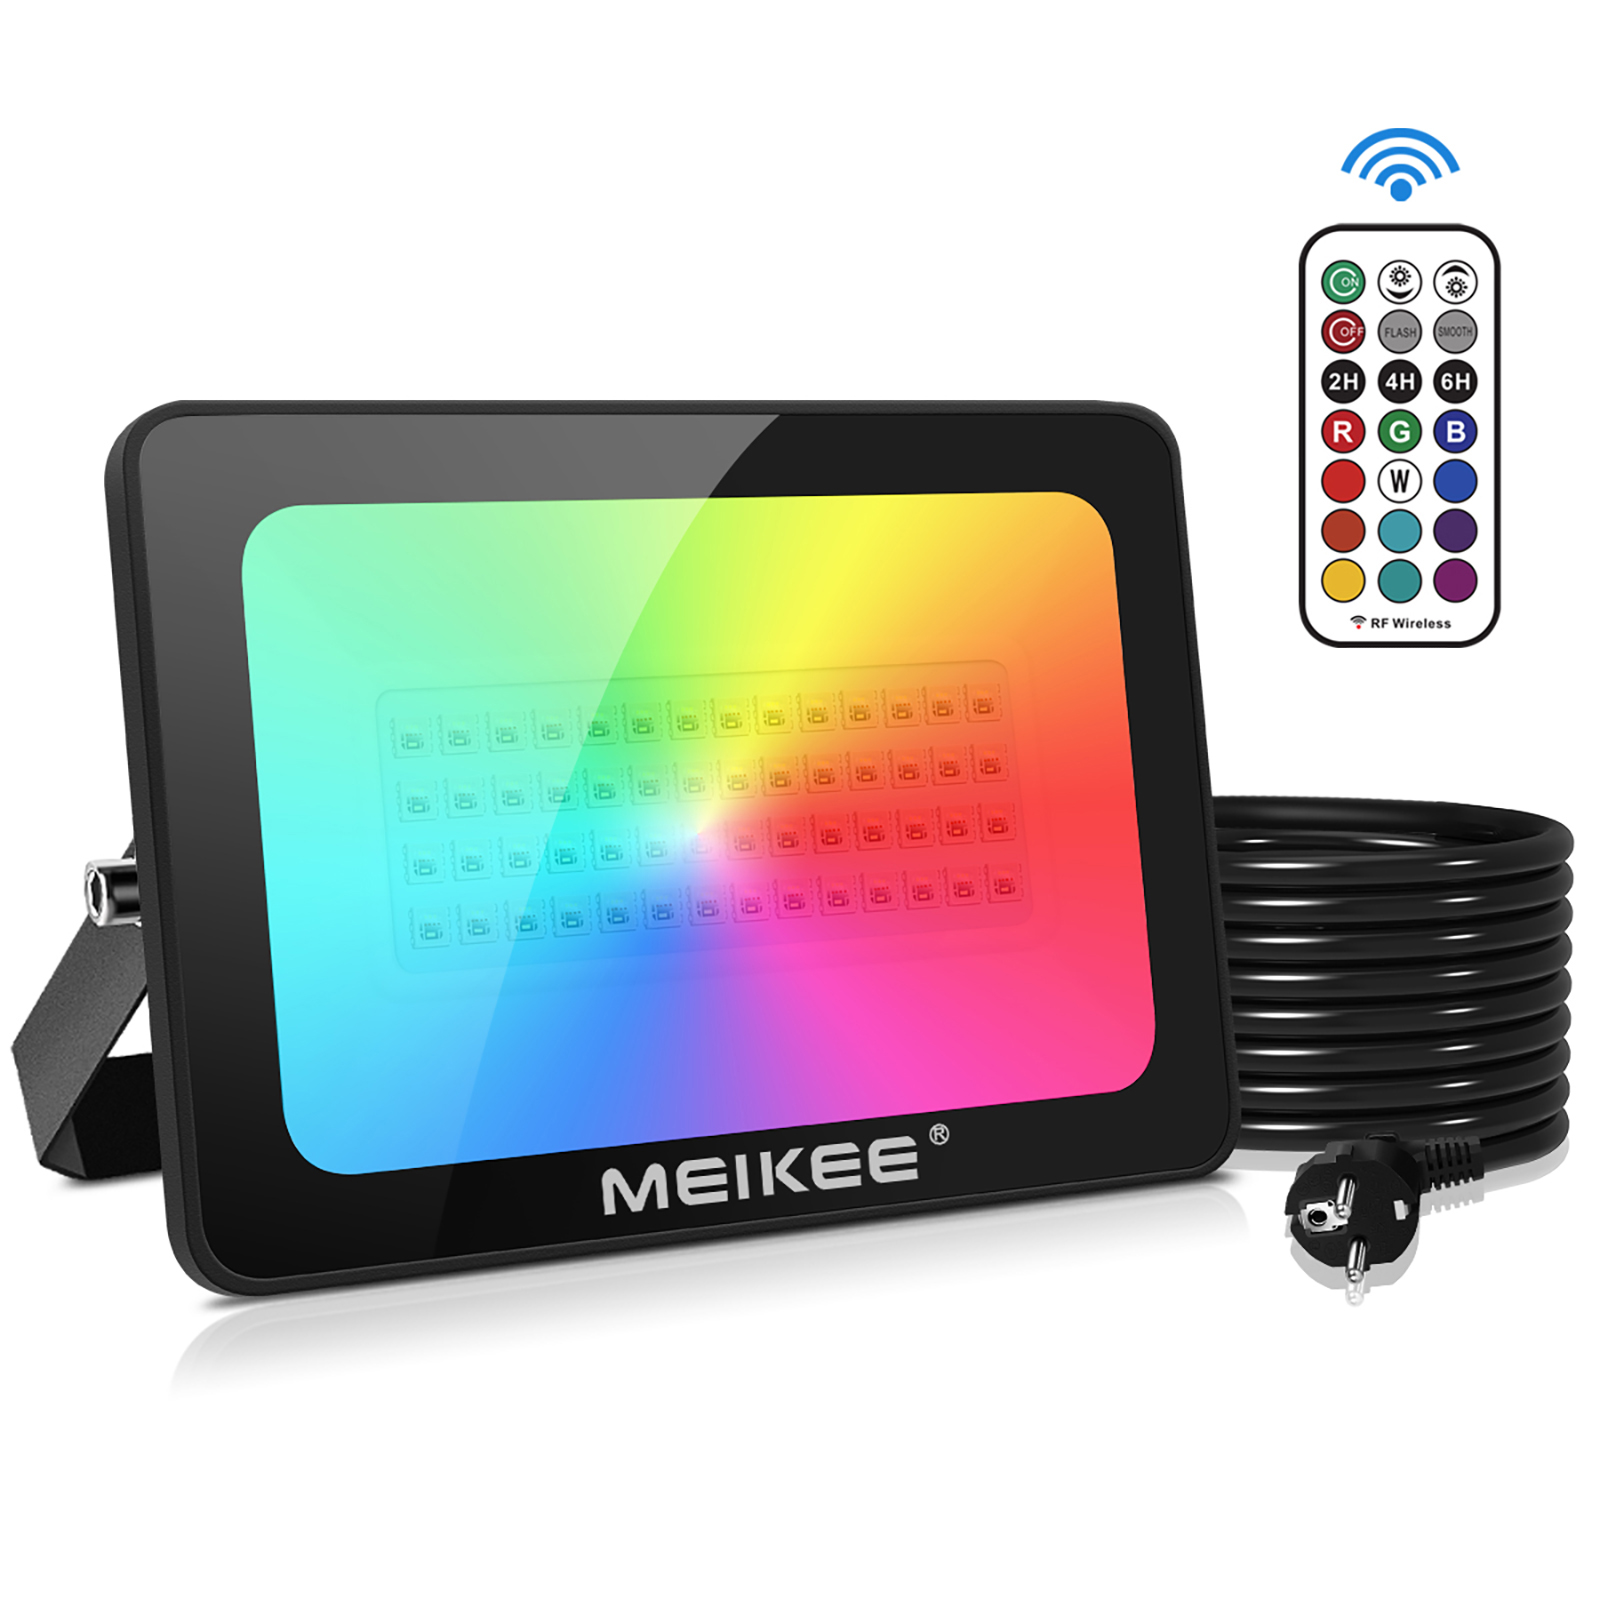 MEIKEE 100W RGB Lights Led Floodlight 360° Remote Control Christmas Lights Auto Timer IP66 Waterproof Colour Changing Light Outdoor Decoration for Halloween Birthday Party Easter Strobe Garden Pond